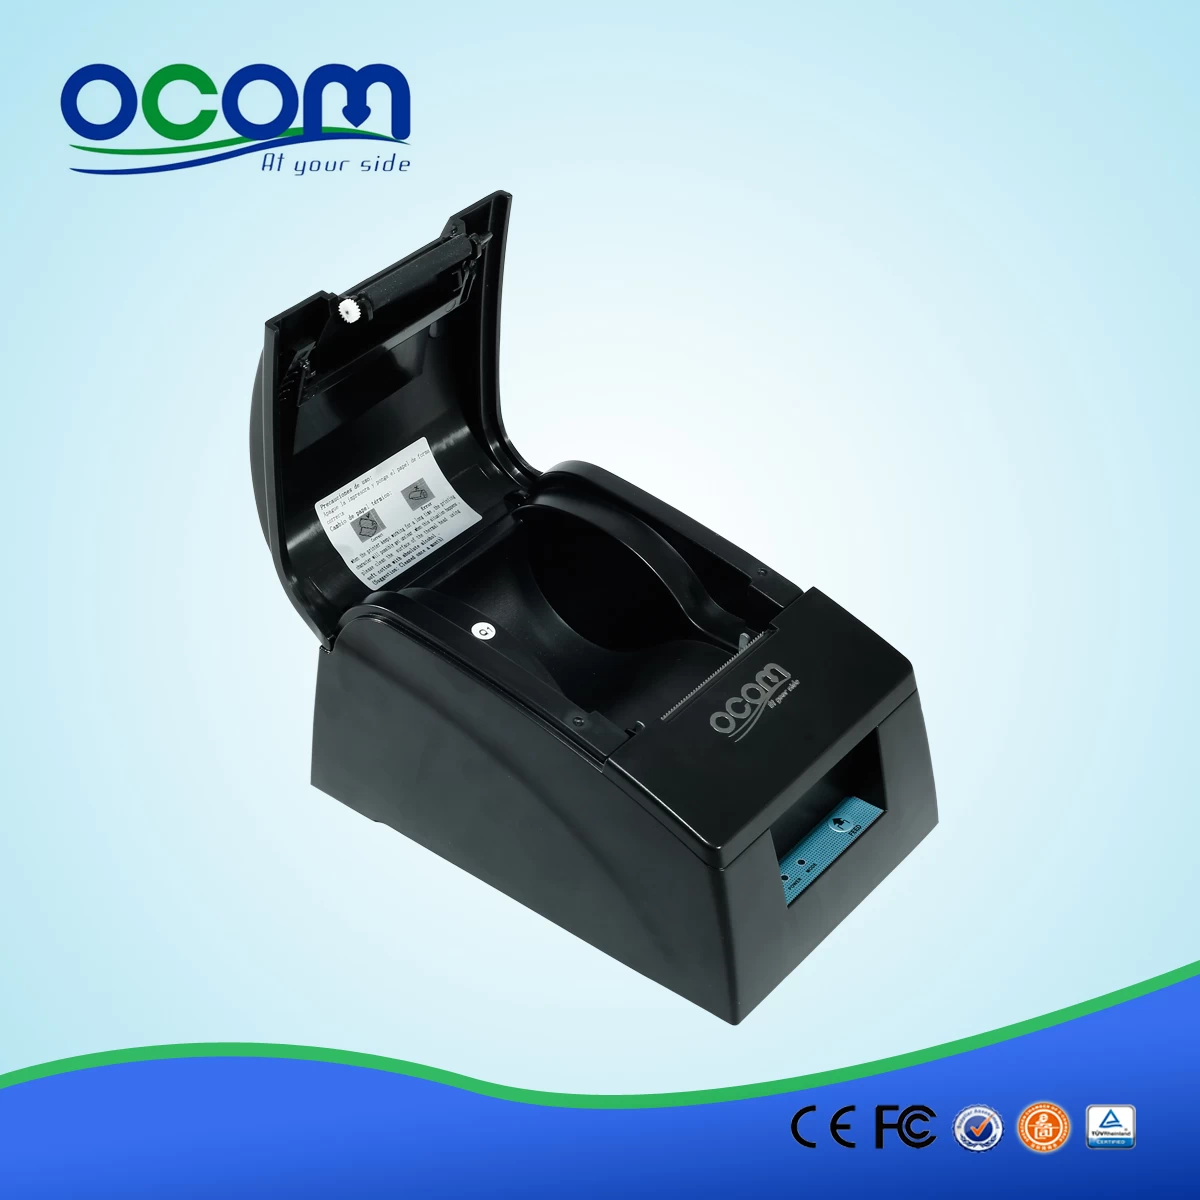 OCPP-586 POS 58MM Thermal Printer with USB RS232 Port